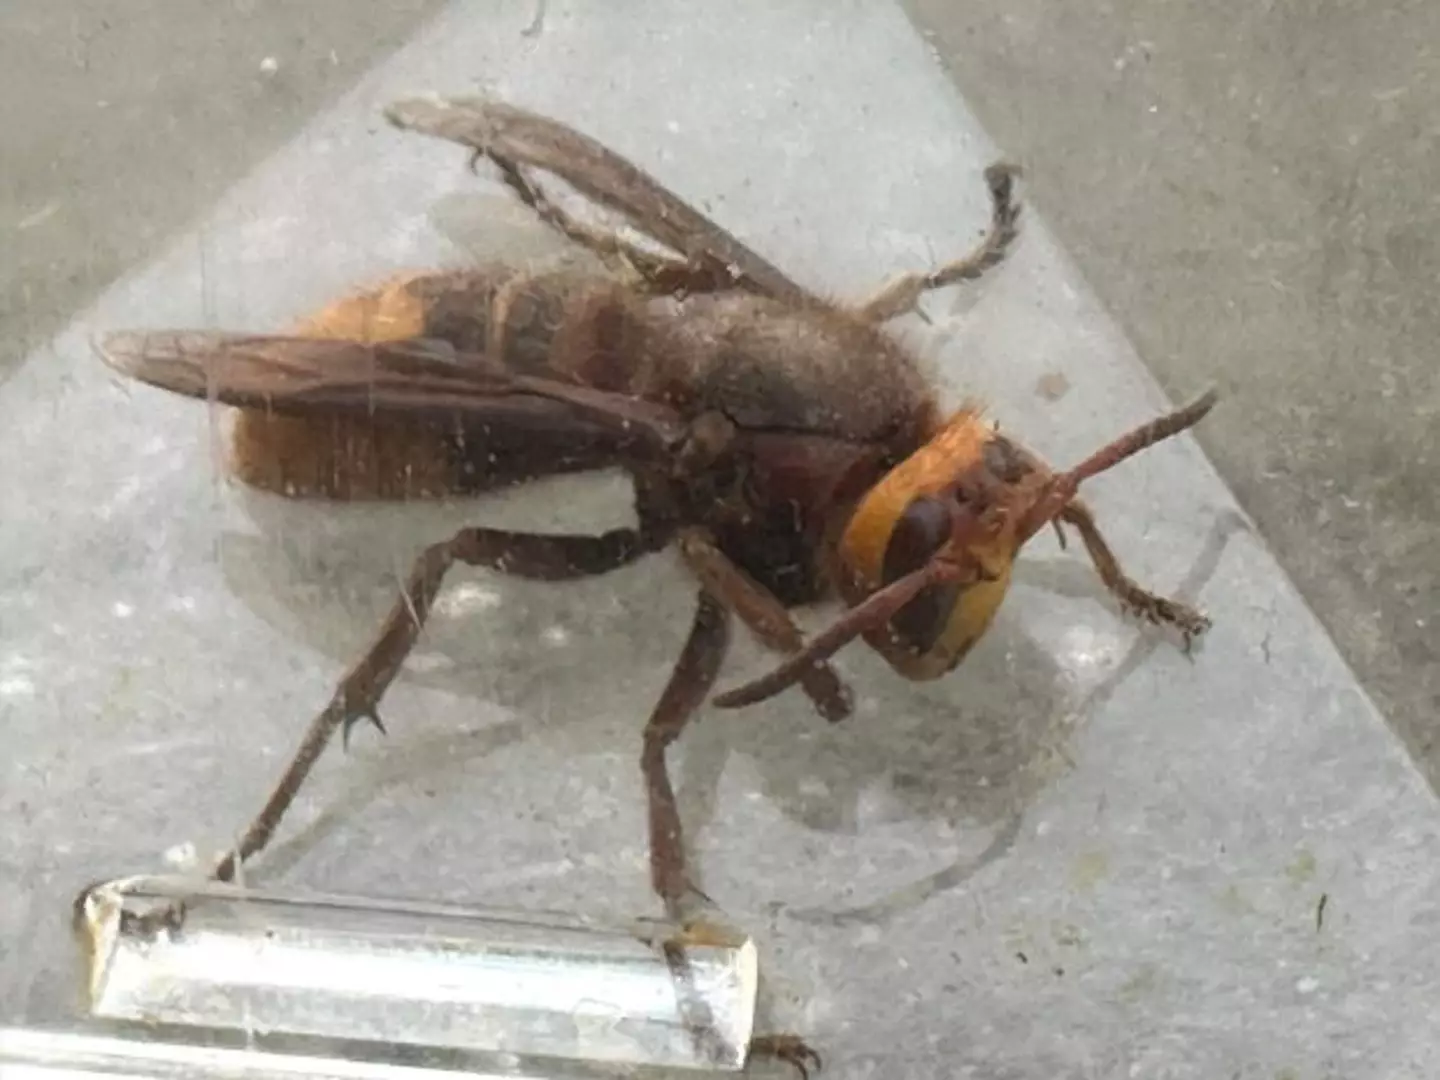 A pest expert has warned Asian hornets that 'chase for half a mile' are back in UK.